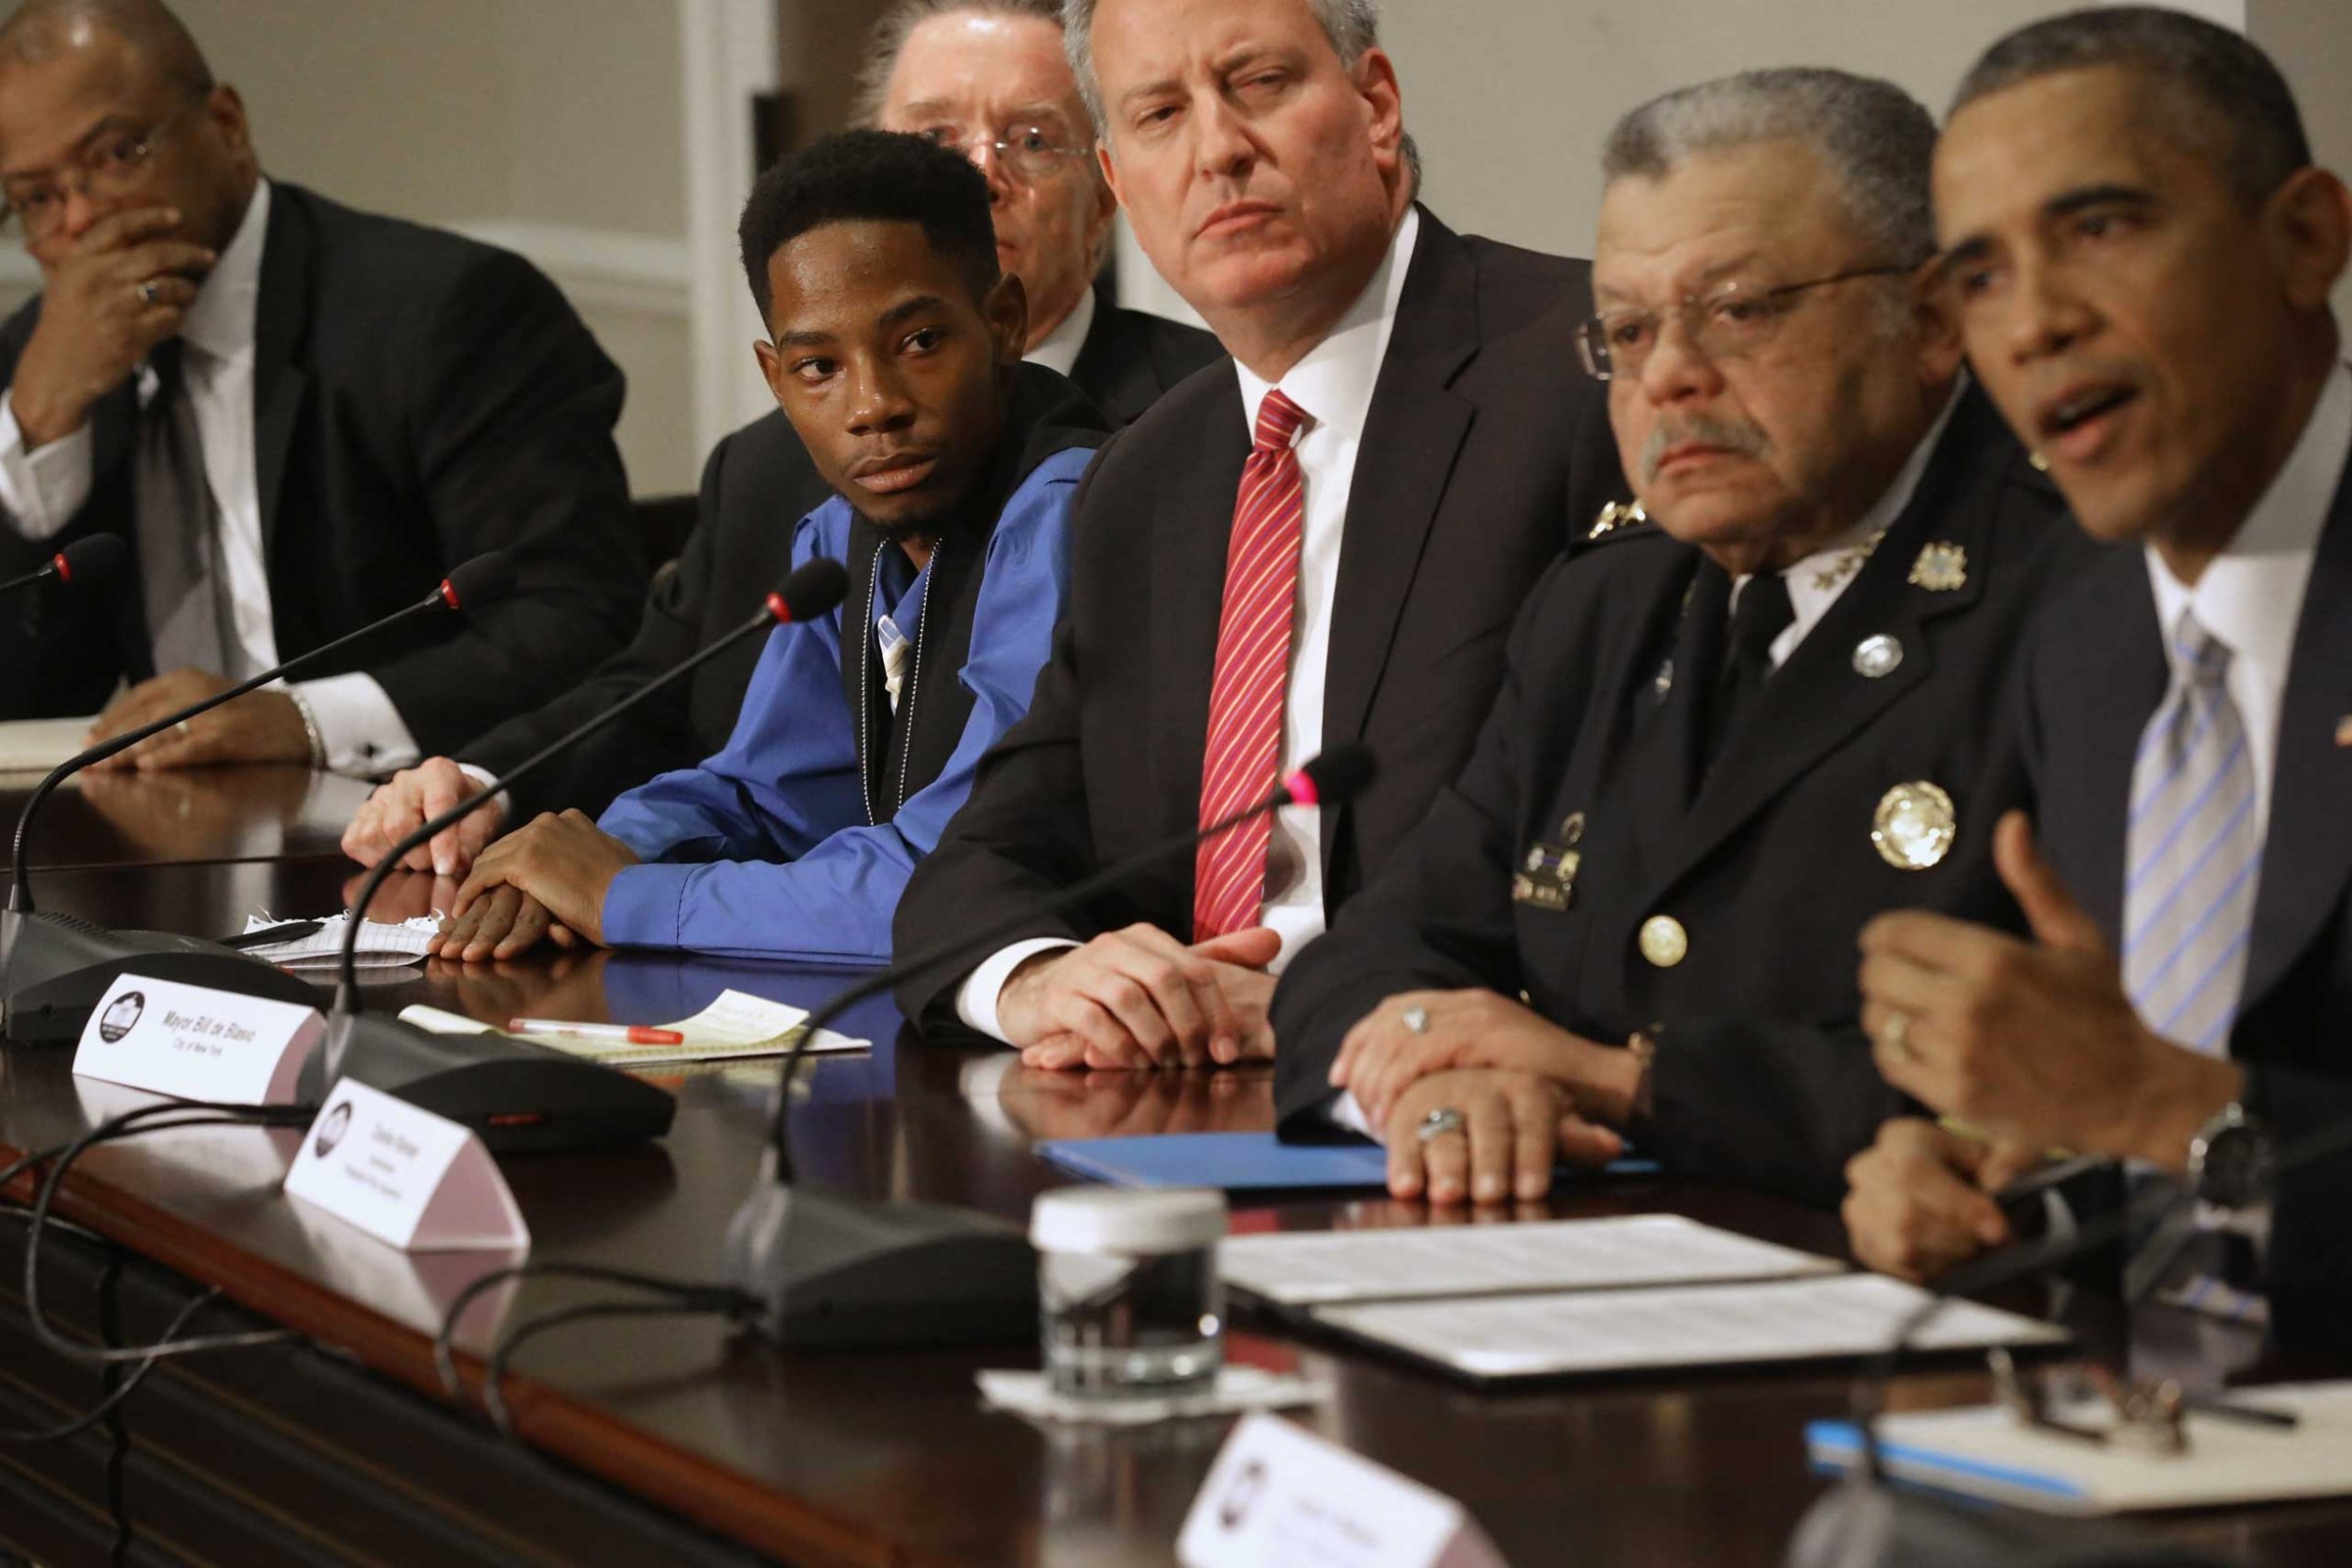 Obama Holds Meeting On Building Trust In Communities After Ferguson Unrest